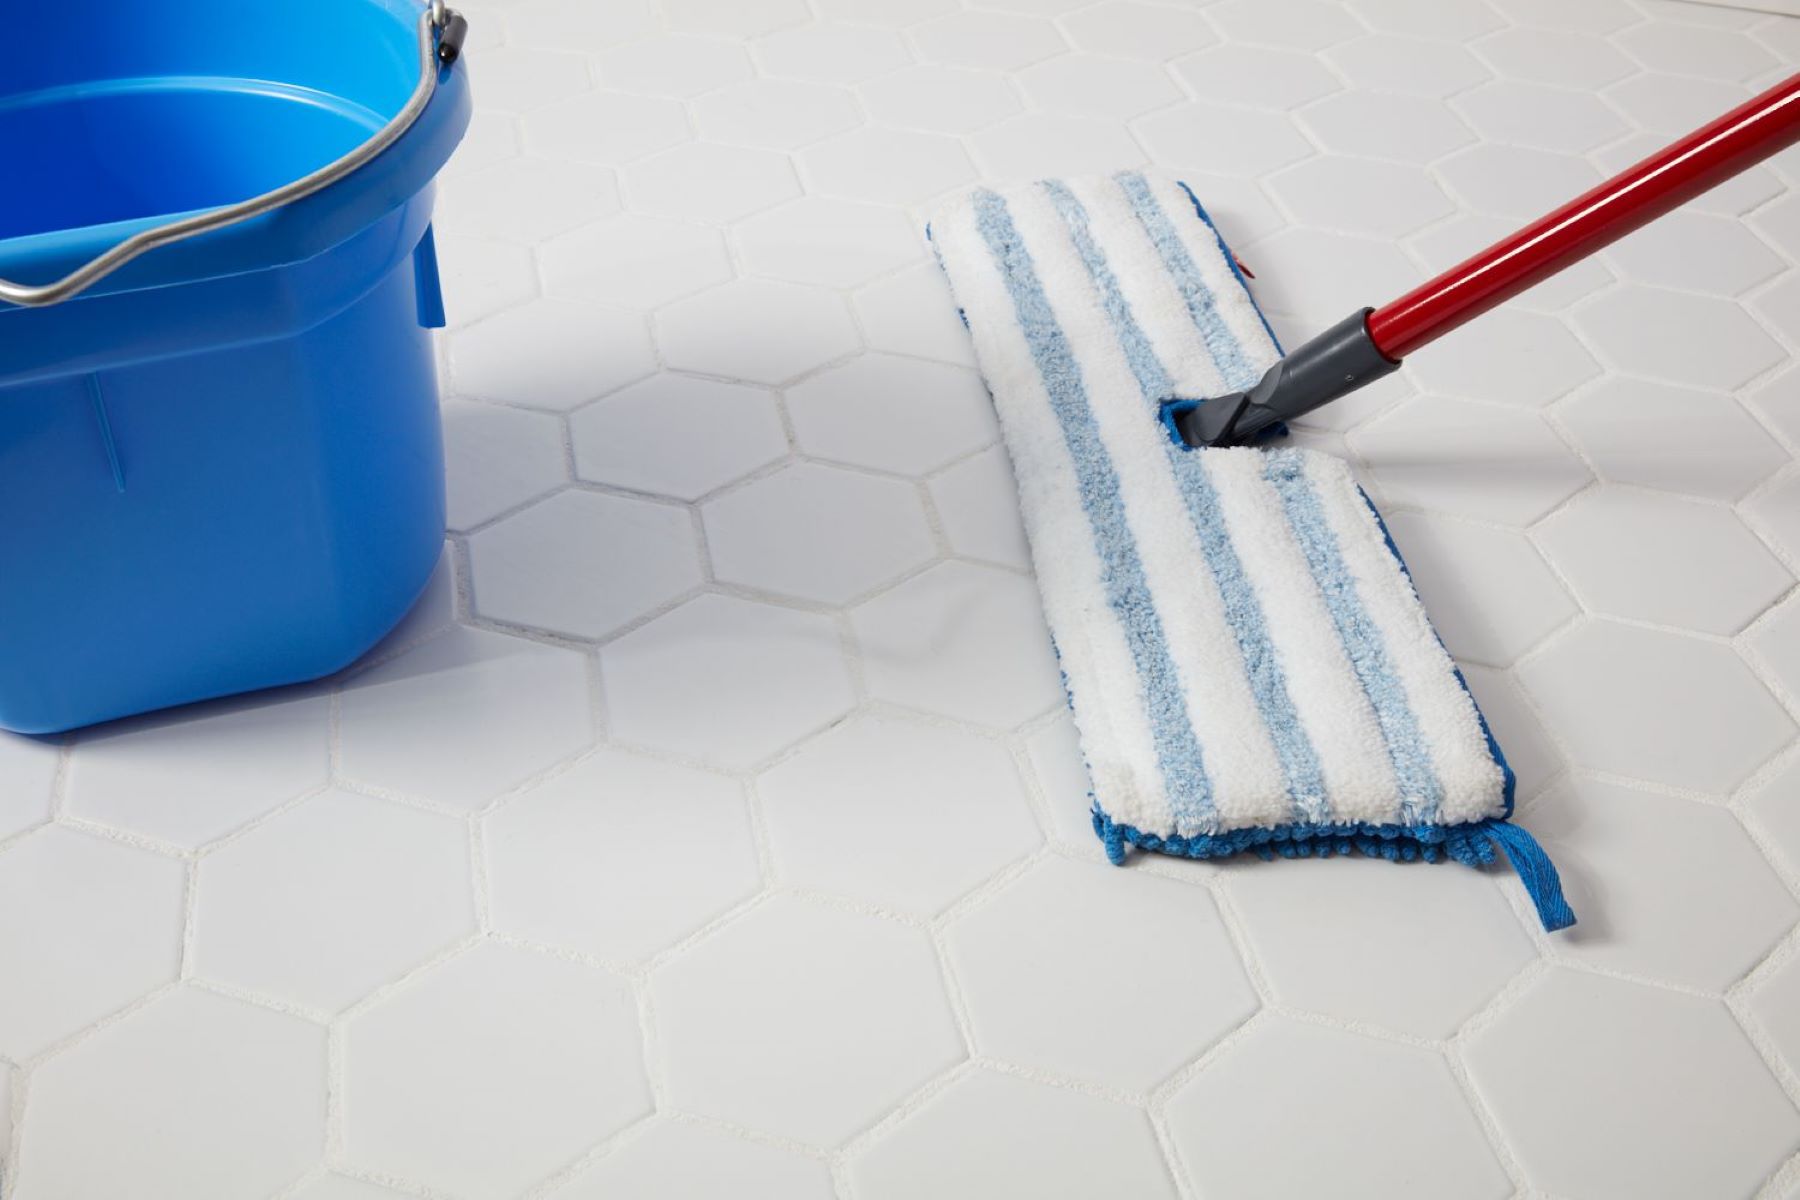 How To Mop Porcelain Floors